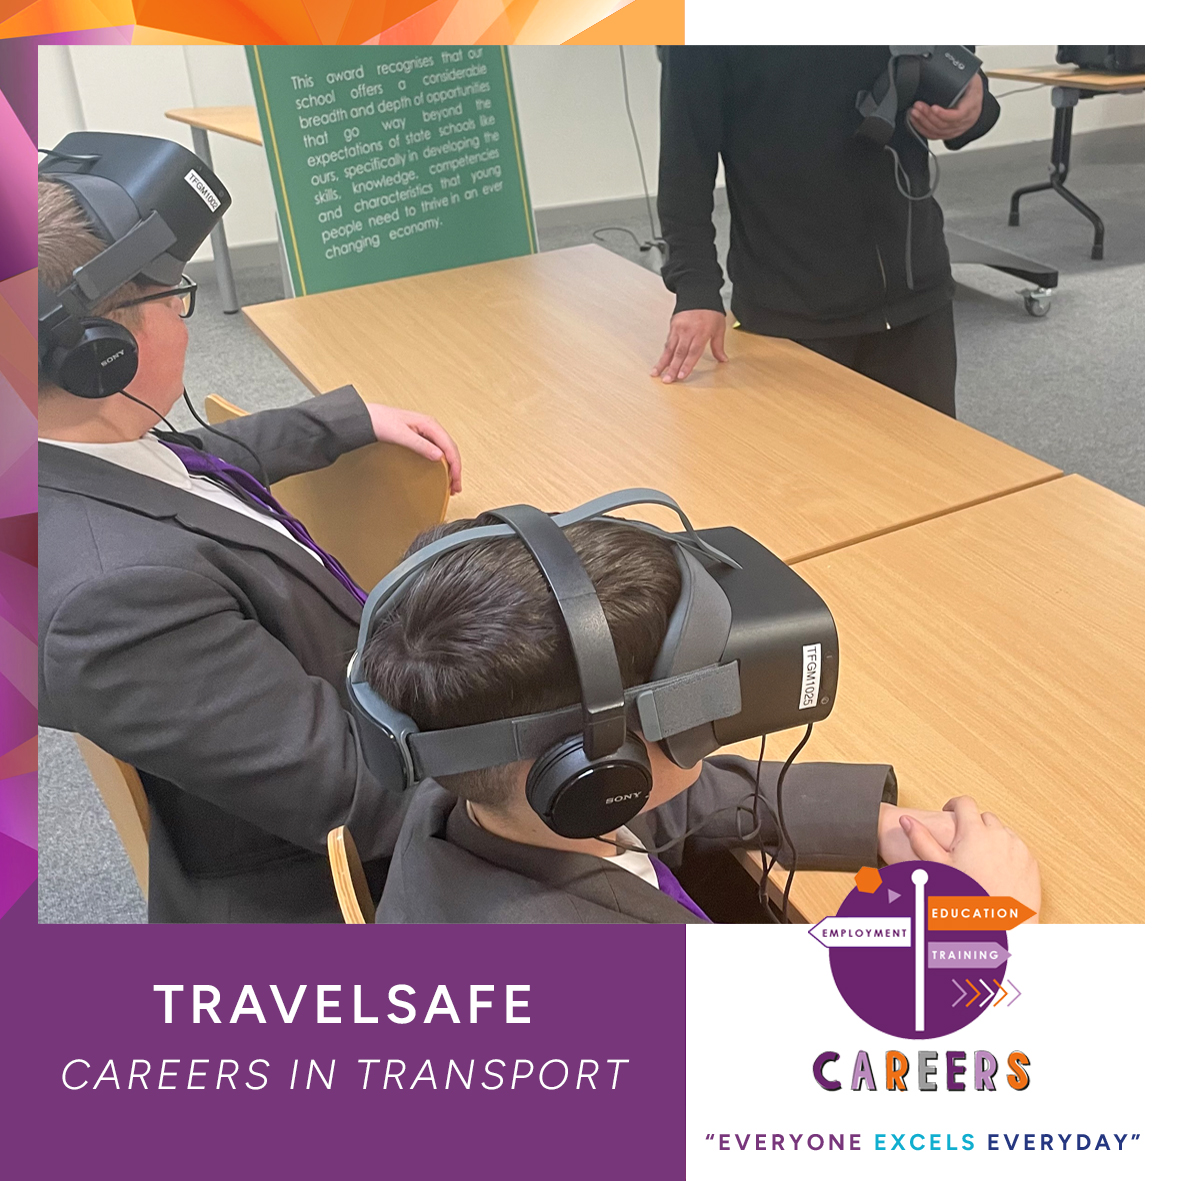 We were thrilled to have Metrolink experts, Paul & Waseem, engaging with a group of passionate students exploring careers in transport! 🌟 @WCSQM #raisingrochdale #worldclass #everyoneexcelseveryday